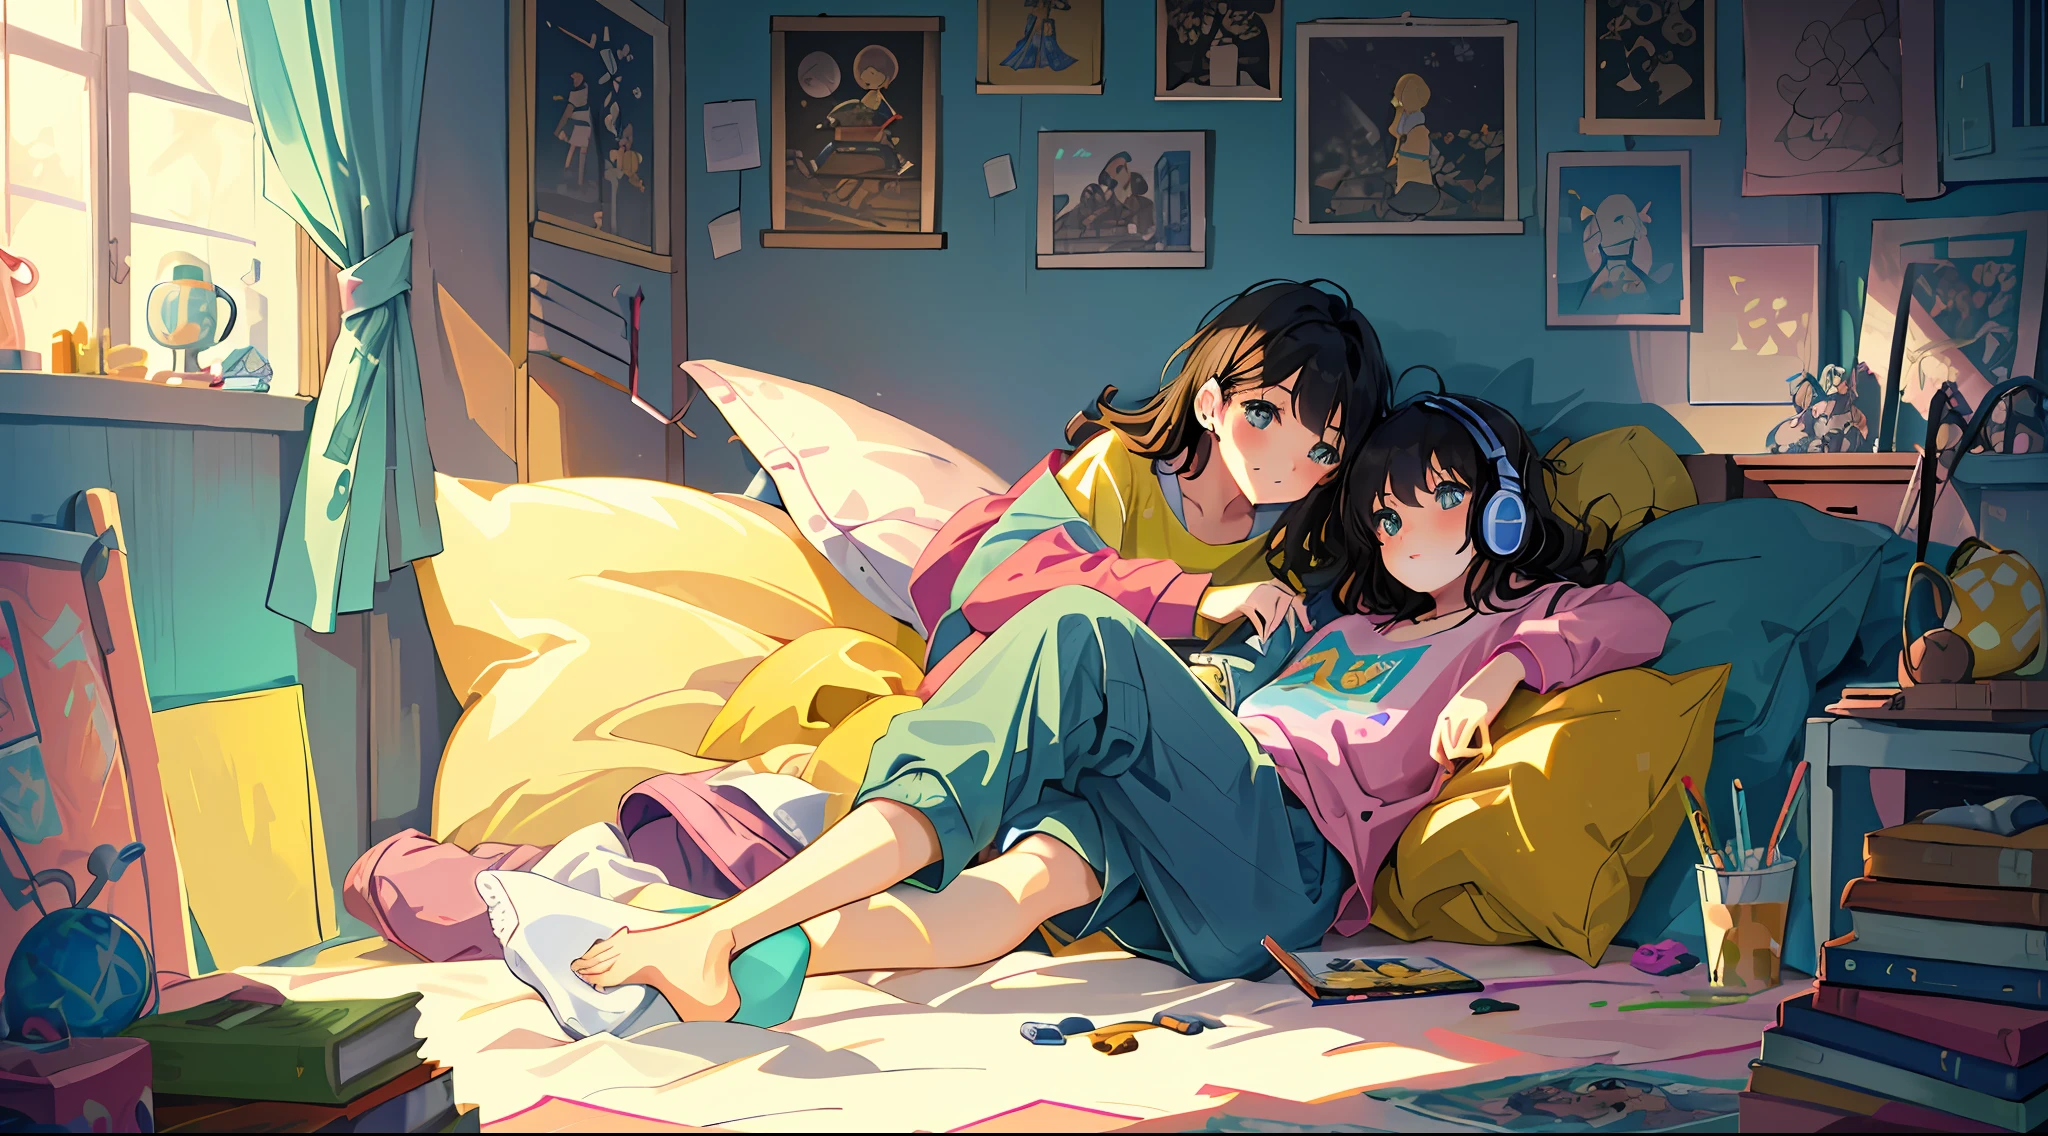 masterpiece, best quality, ultra-detailed, illustration, 2girls, sitting, playful, gaming, messy room, teenage, 15 years old, lighthearted, cozy, relaxed, cheerful, fondness, love, friendship, cute, touching, computer game, controllers, smiles, joy, laughter, comfortable, slippers, pajamas, messy hair, tousled, disarray, cluttered, toys, posters, pillows, blankets, lamp, desk, chair, cozy atmosphere, night lighting, bright colors, soft pastels, flowers, plants, books, headphones, snacks, soda, energy drinks, manga, novels, plushies, figurines, posters, pictures, posters, wall scrolls, stickers, decorations, bed, blankets, pillows, stuffed animals, cozy blankets, warm blankets, comfortable clothes, casual attire, leisure wear, sweatshirt, sweatpants, shorts, t-shirt, tank top, socks,